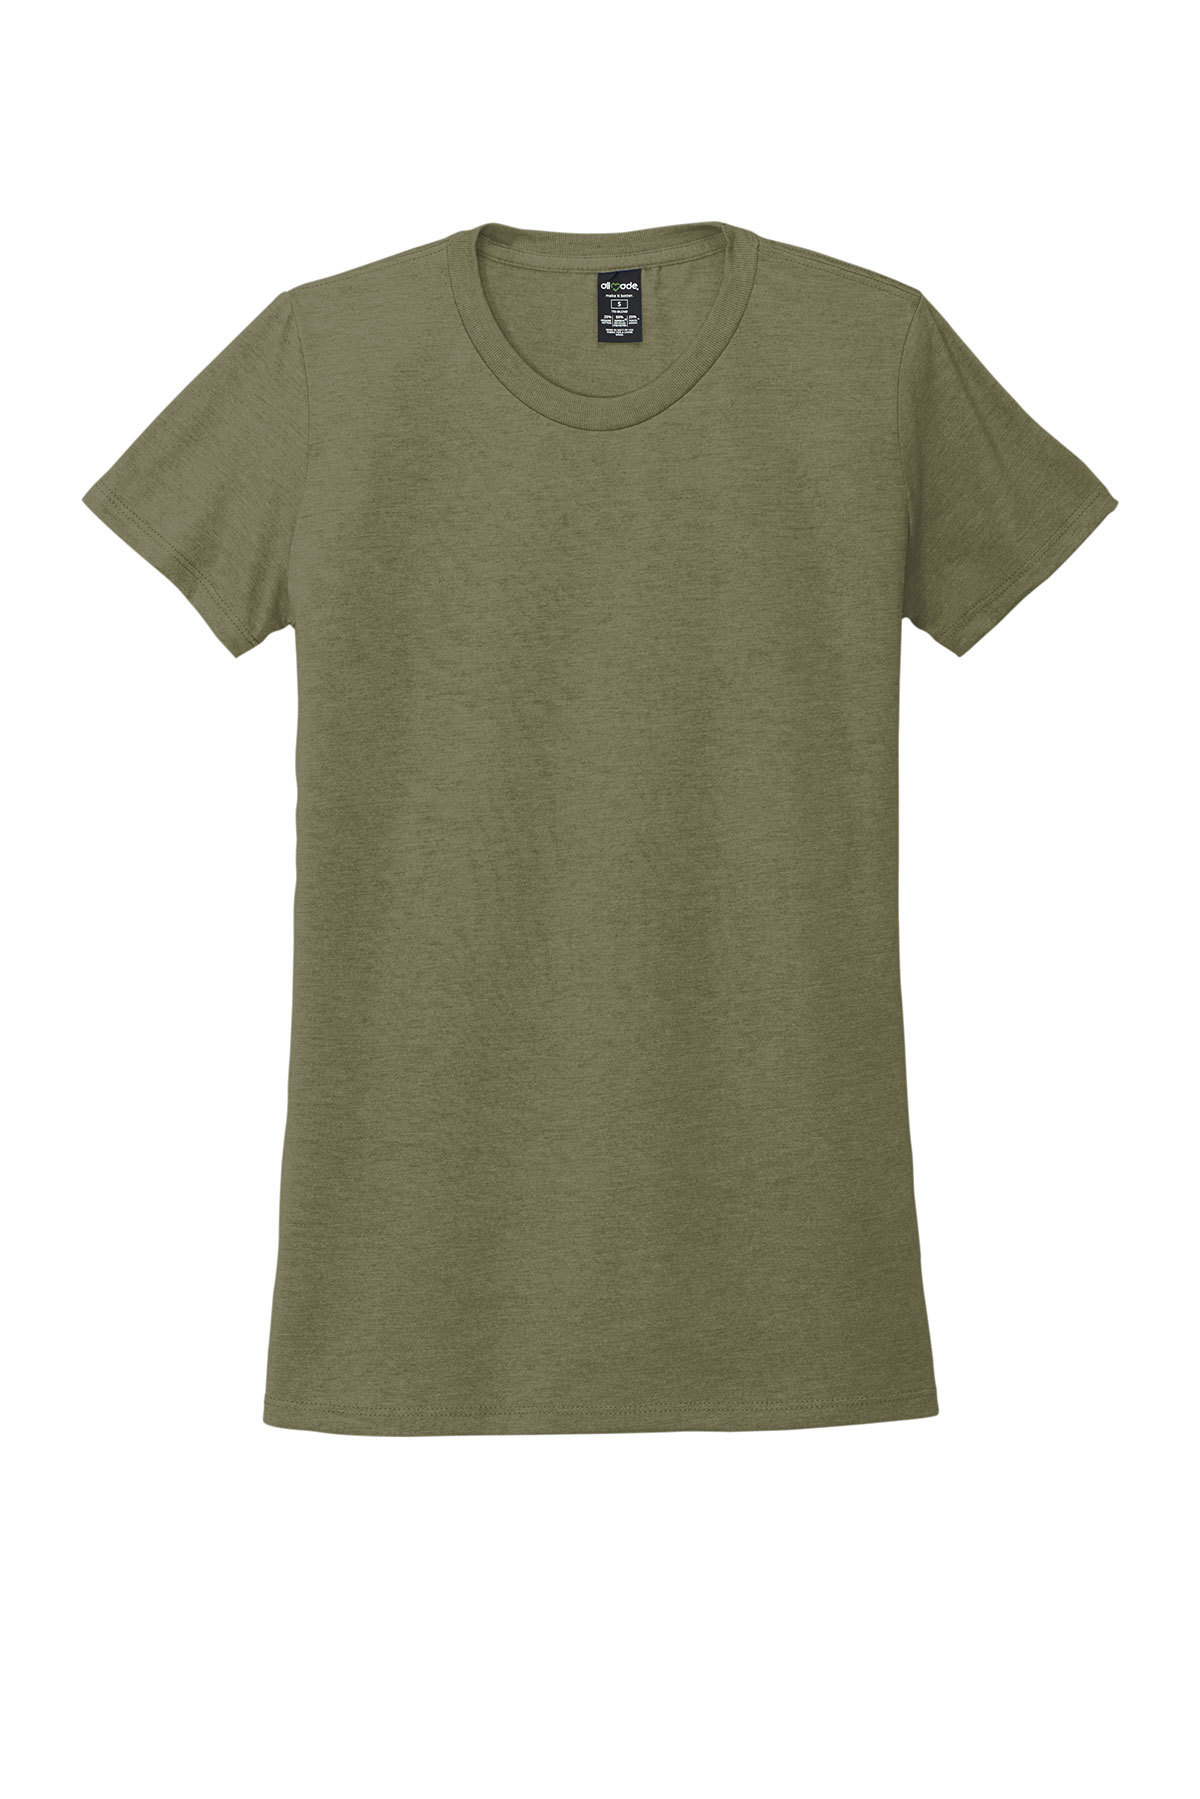 click to view Olive You Green